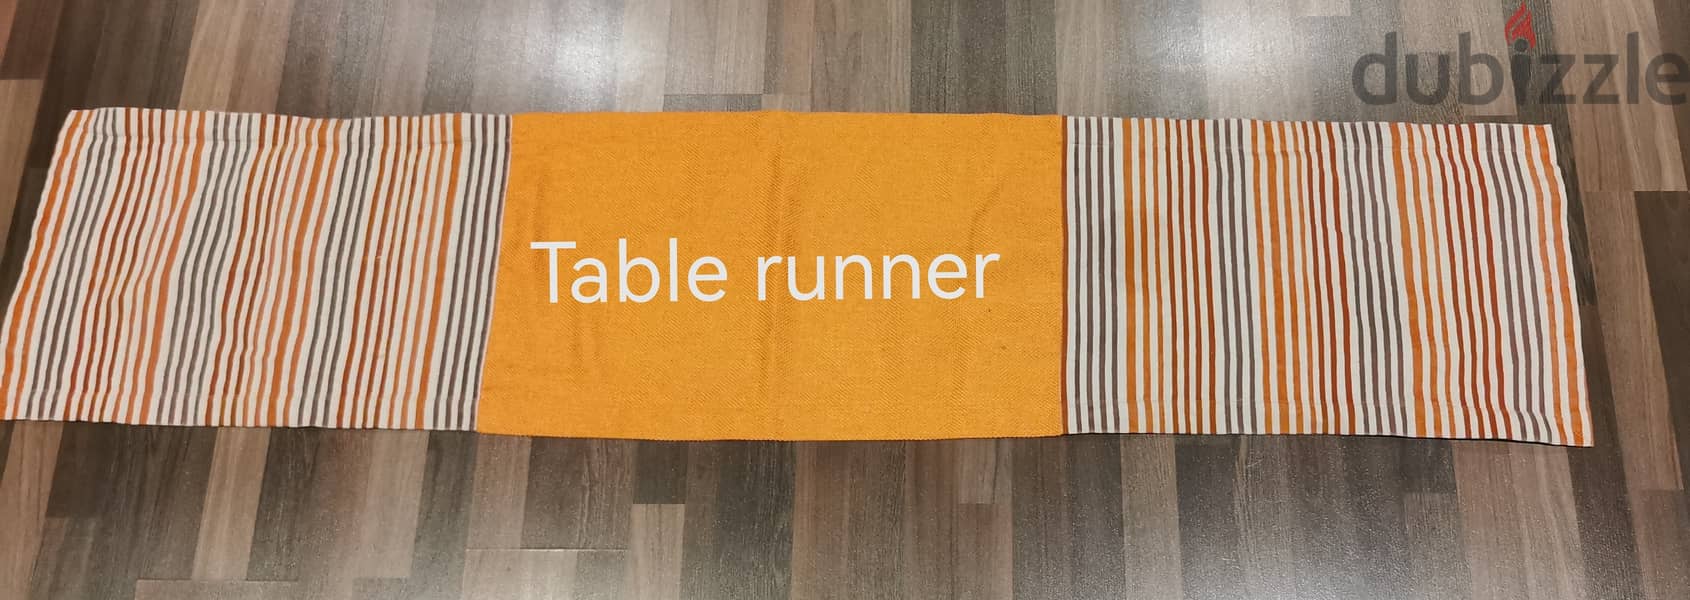 Drinking glasses, place mats & table runner 2